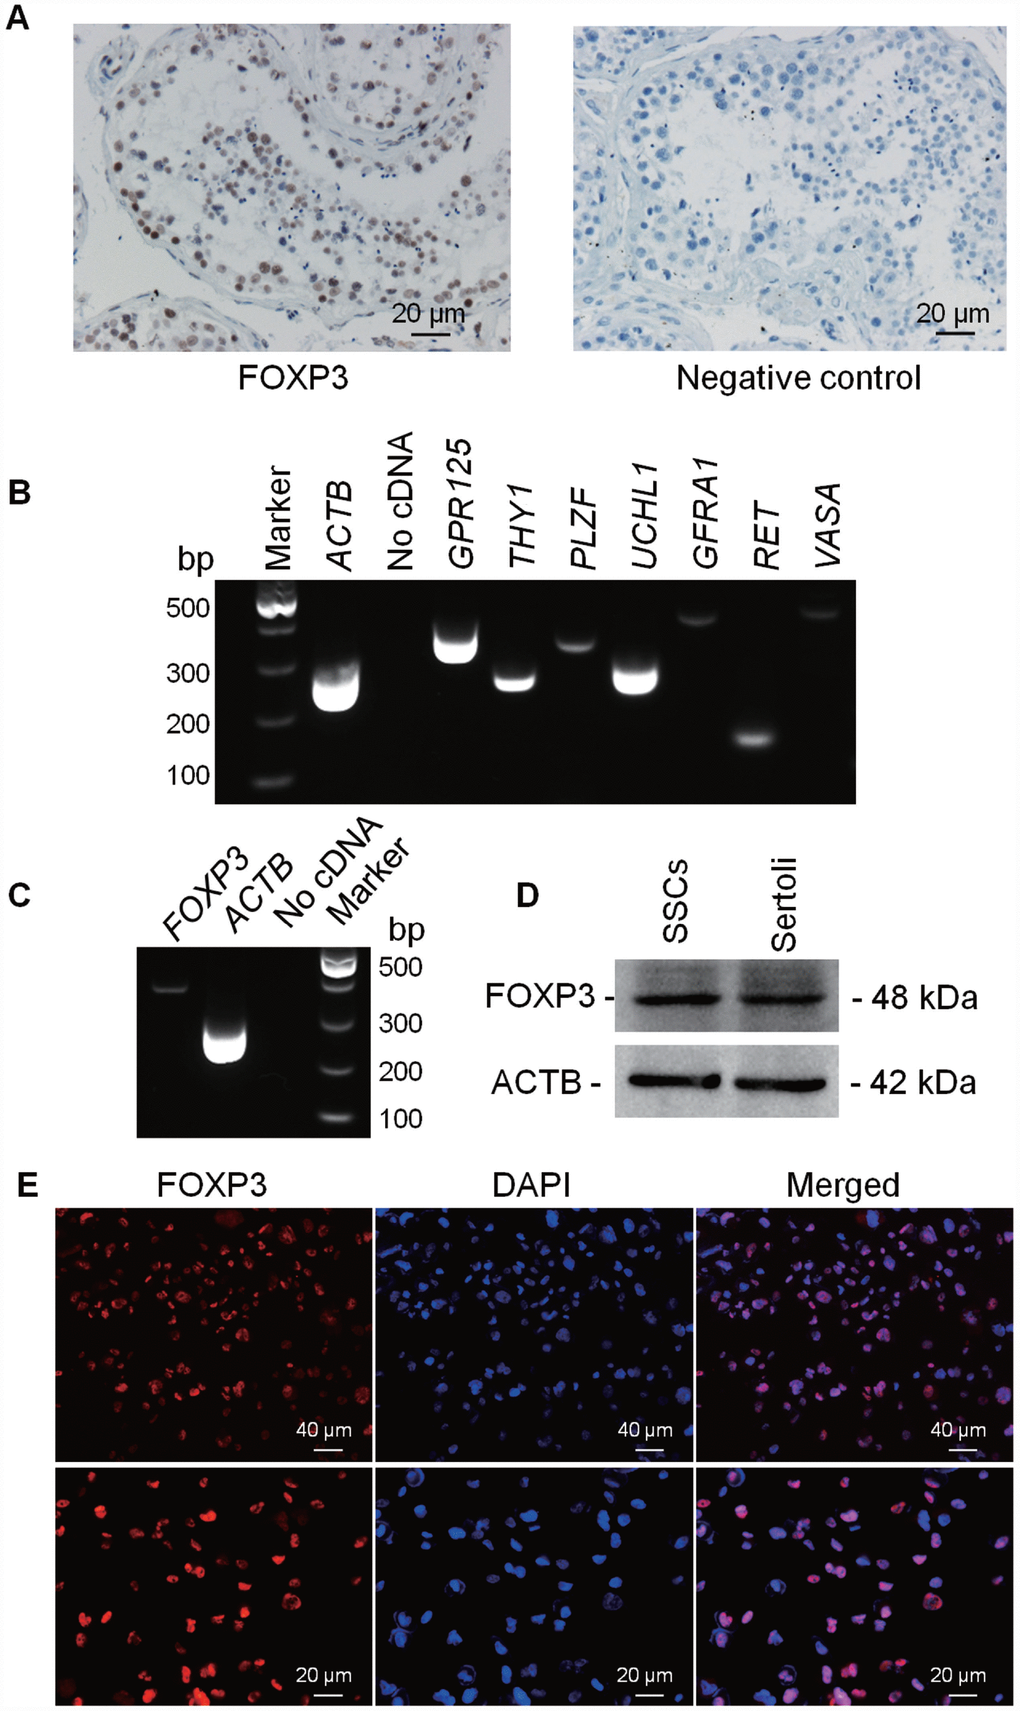 Expression and location of FOXP3 proteins in human testes and human SSC line. Immuno-histochemistry revealed cellular localization of FOXP3 in human testes (left panel). Replacement of anti-FOXP3 with PBS was used as a negative control (right panel). Scale bars = 20 μm. (B) RT-PCR showed the transcripts of GPR125, THY1, PLZF, UCHL1, GFRA1, RET and VASA in human SSC line. Samples without cDNA (No cDNA) but PCR with gene primers were used as negative controls. ACTB served as loading controls of total RNA. (C) RT-PCR showed the mRNA level of FOXP3 in human SSC line. Samples without cDNA (No cDNA) but PCR with gene primers were used as negative controls, and ACTB served as a loading control of total RNA. (D) Western blots revealed the expression of FOXP3 protein in human SSC line. ACTB served as the control of the loading proteins. Human Sertoli cells were utilized as a positive control. (E) Immunocytochemistry revealed cellular localization of FOXP3 in human SSC line. Fluorescent signals of FOXP3 (red) and DAPI (blue) were imaged individually and merged under fluorescence microscope. Scale bars = 40 μm and 20 μm, respectively. All experiments were repeated for at least three times.